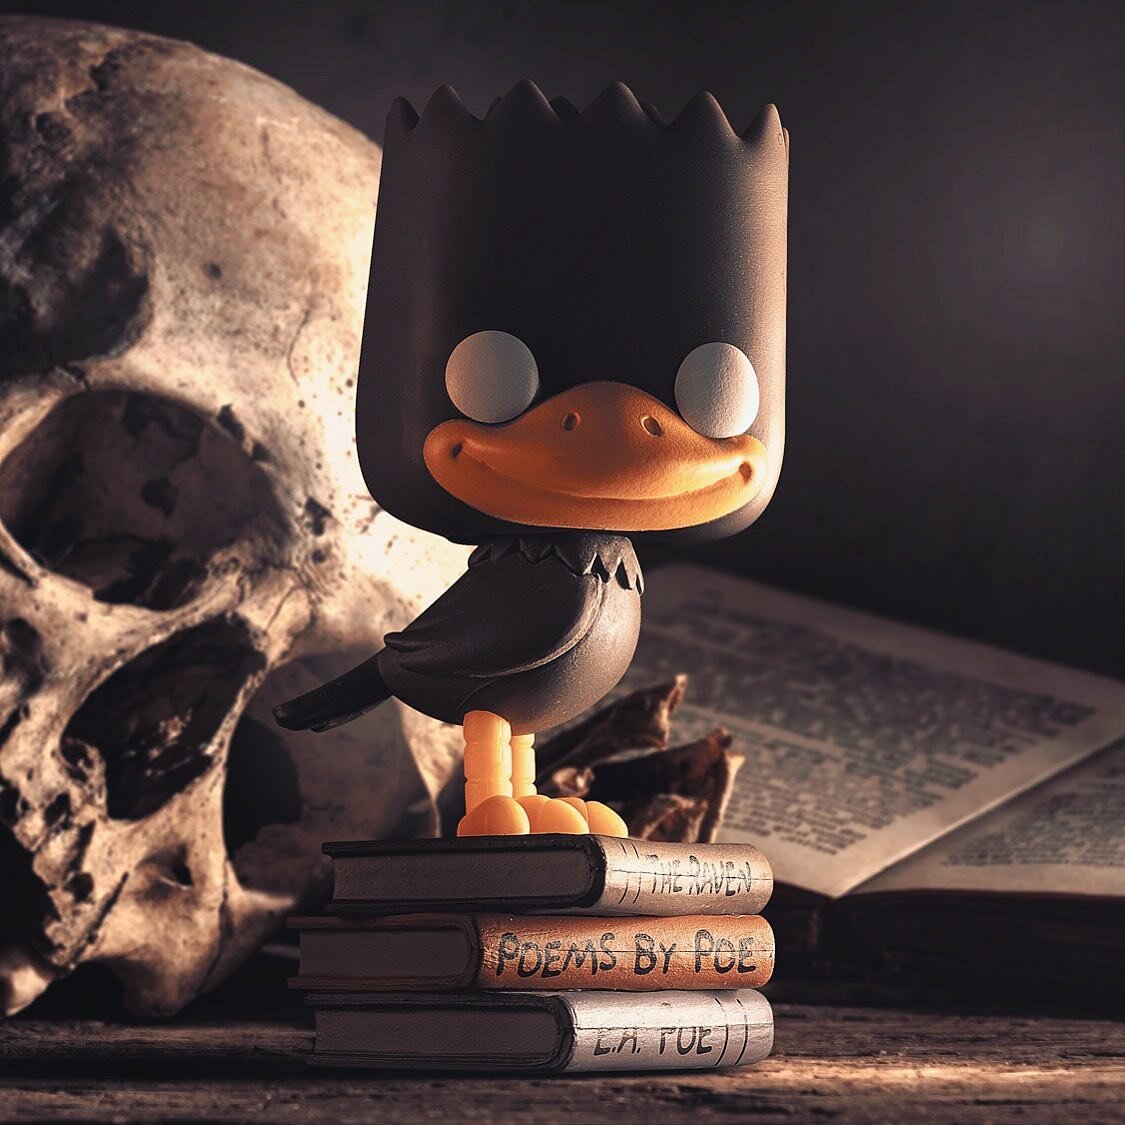 Nevermore! We have a whole highlights section dedicated to our Simpsons Pops. Check it out right under our profile!

&mdash;&mdash;&mdash;&mdash;&mdash;&mdash;&mdash;&mdash;&mdash;&mdash;&mdash;
🍽 @darksidepoa
📸 @darksidegalleries
🙏🏻 @originalfun